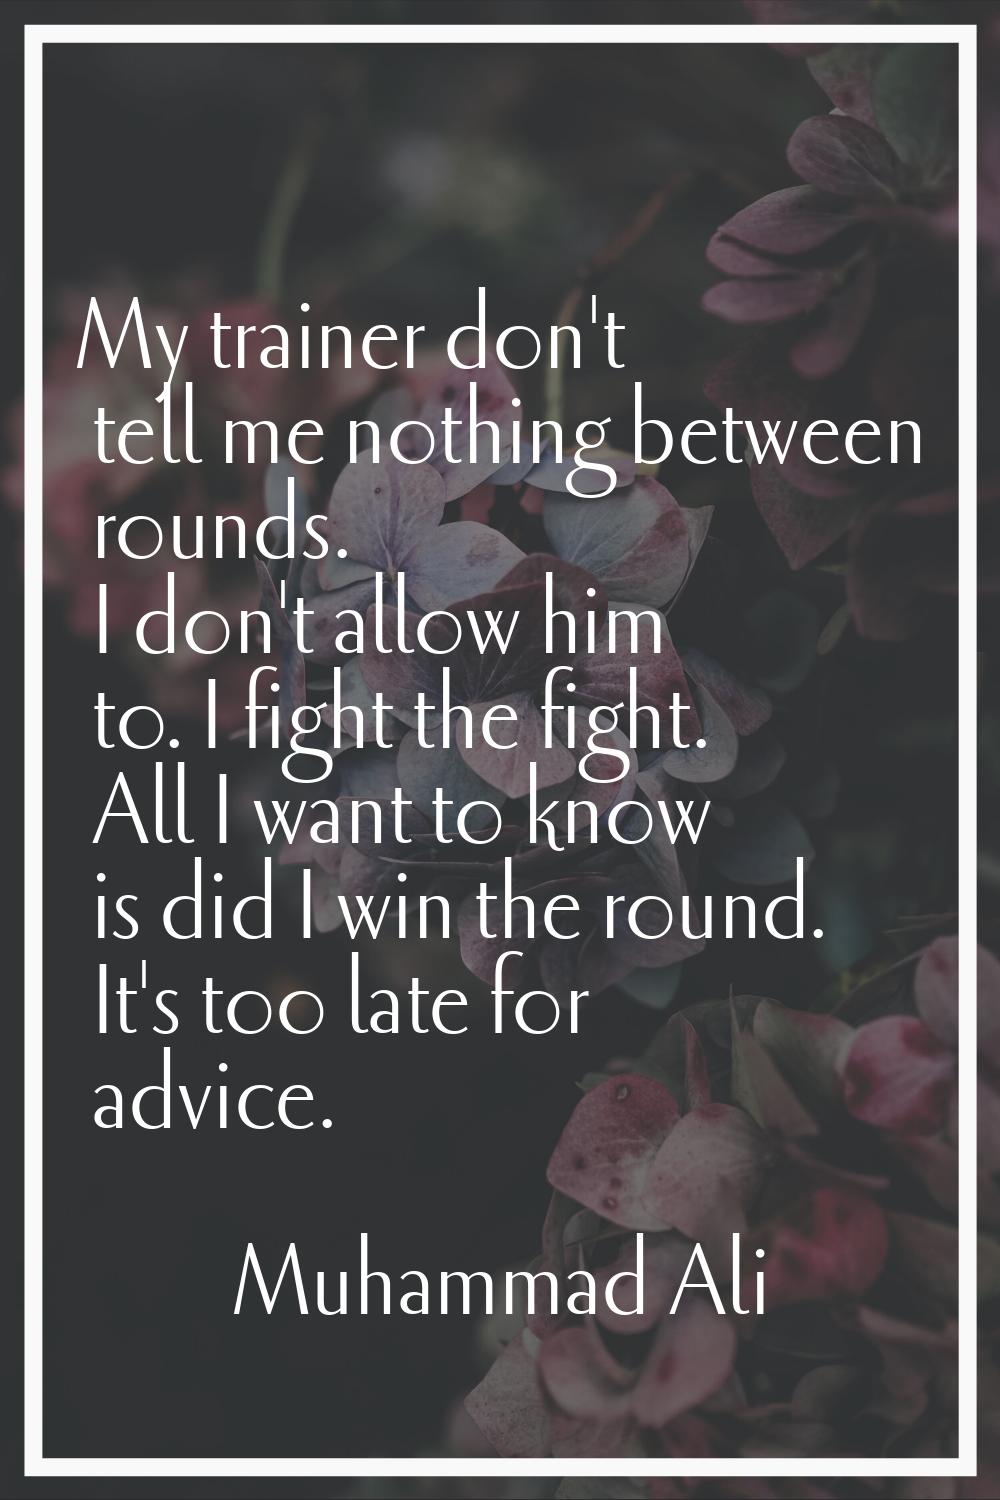 My trainer don't tell me nothing between rounds. I don't allow him to. I fight the fight. All I wan